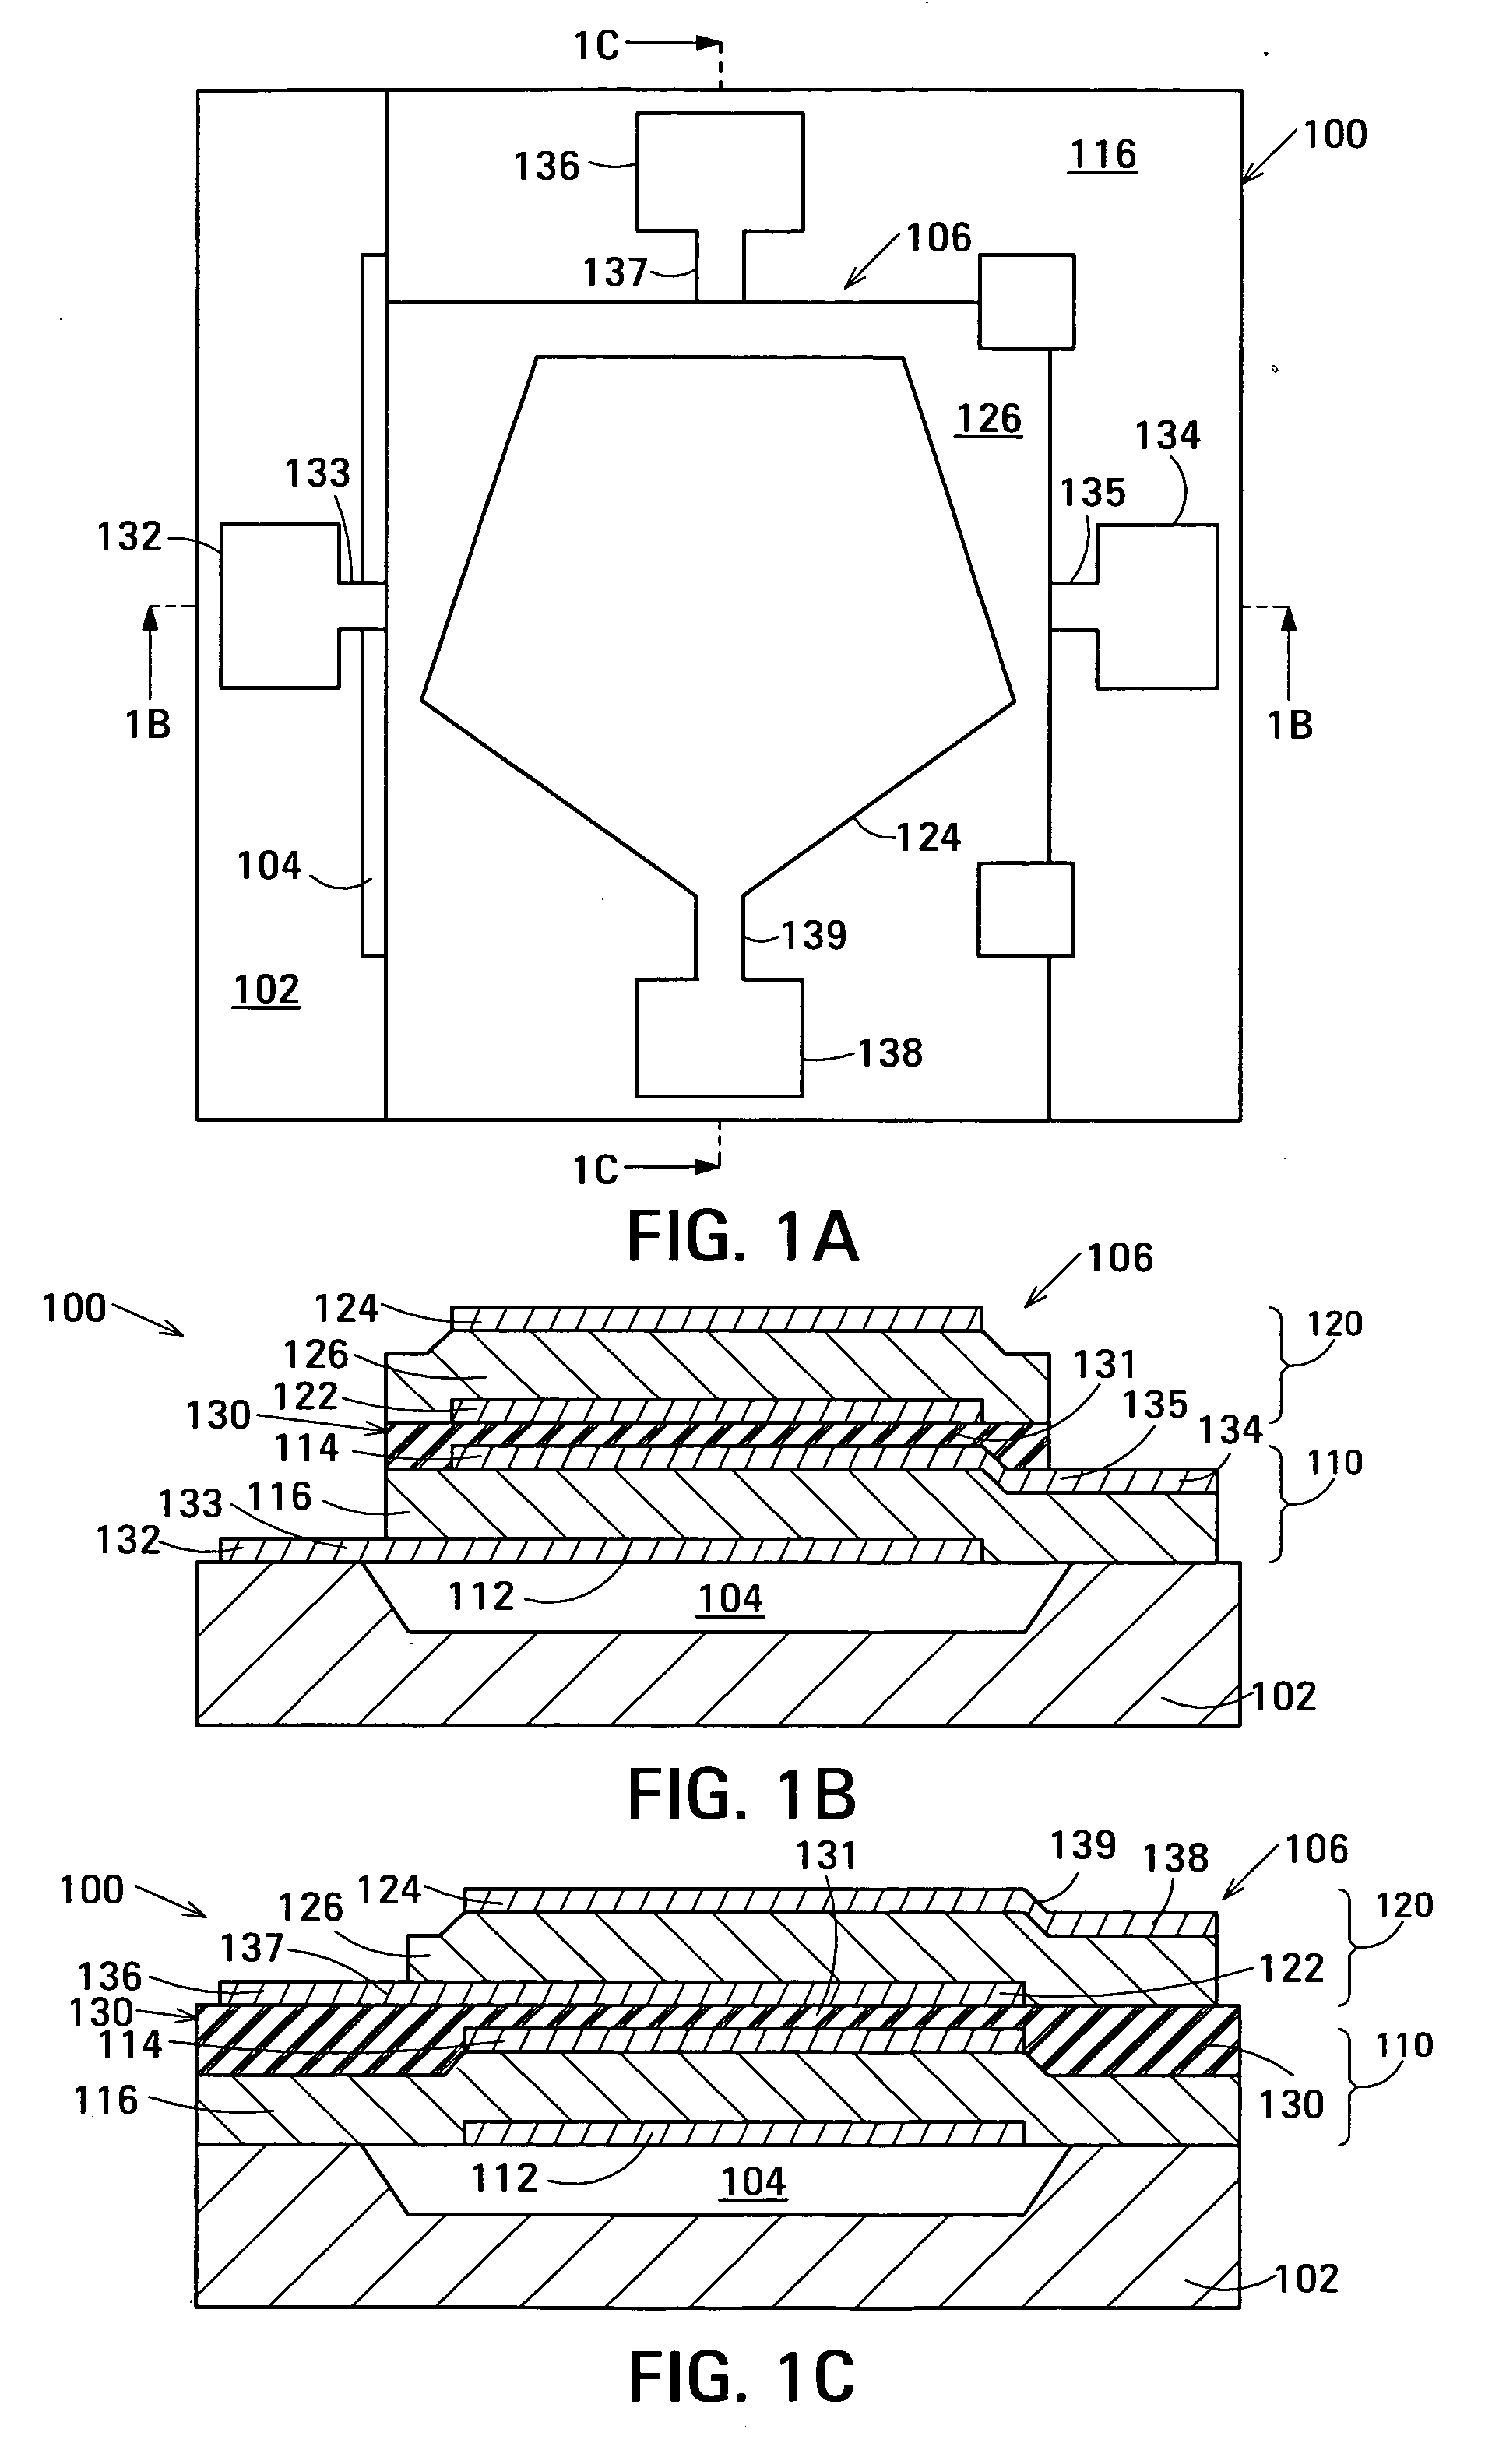 Thin-film acoustically-coupled transformer